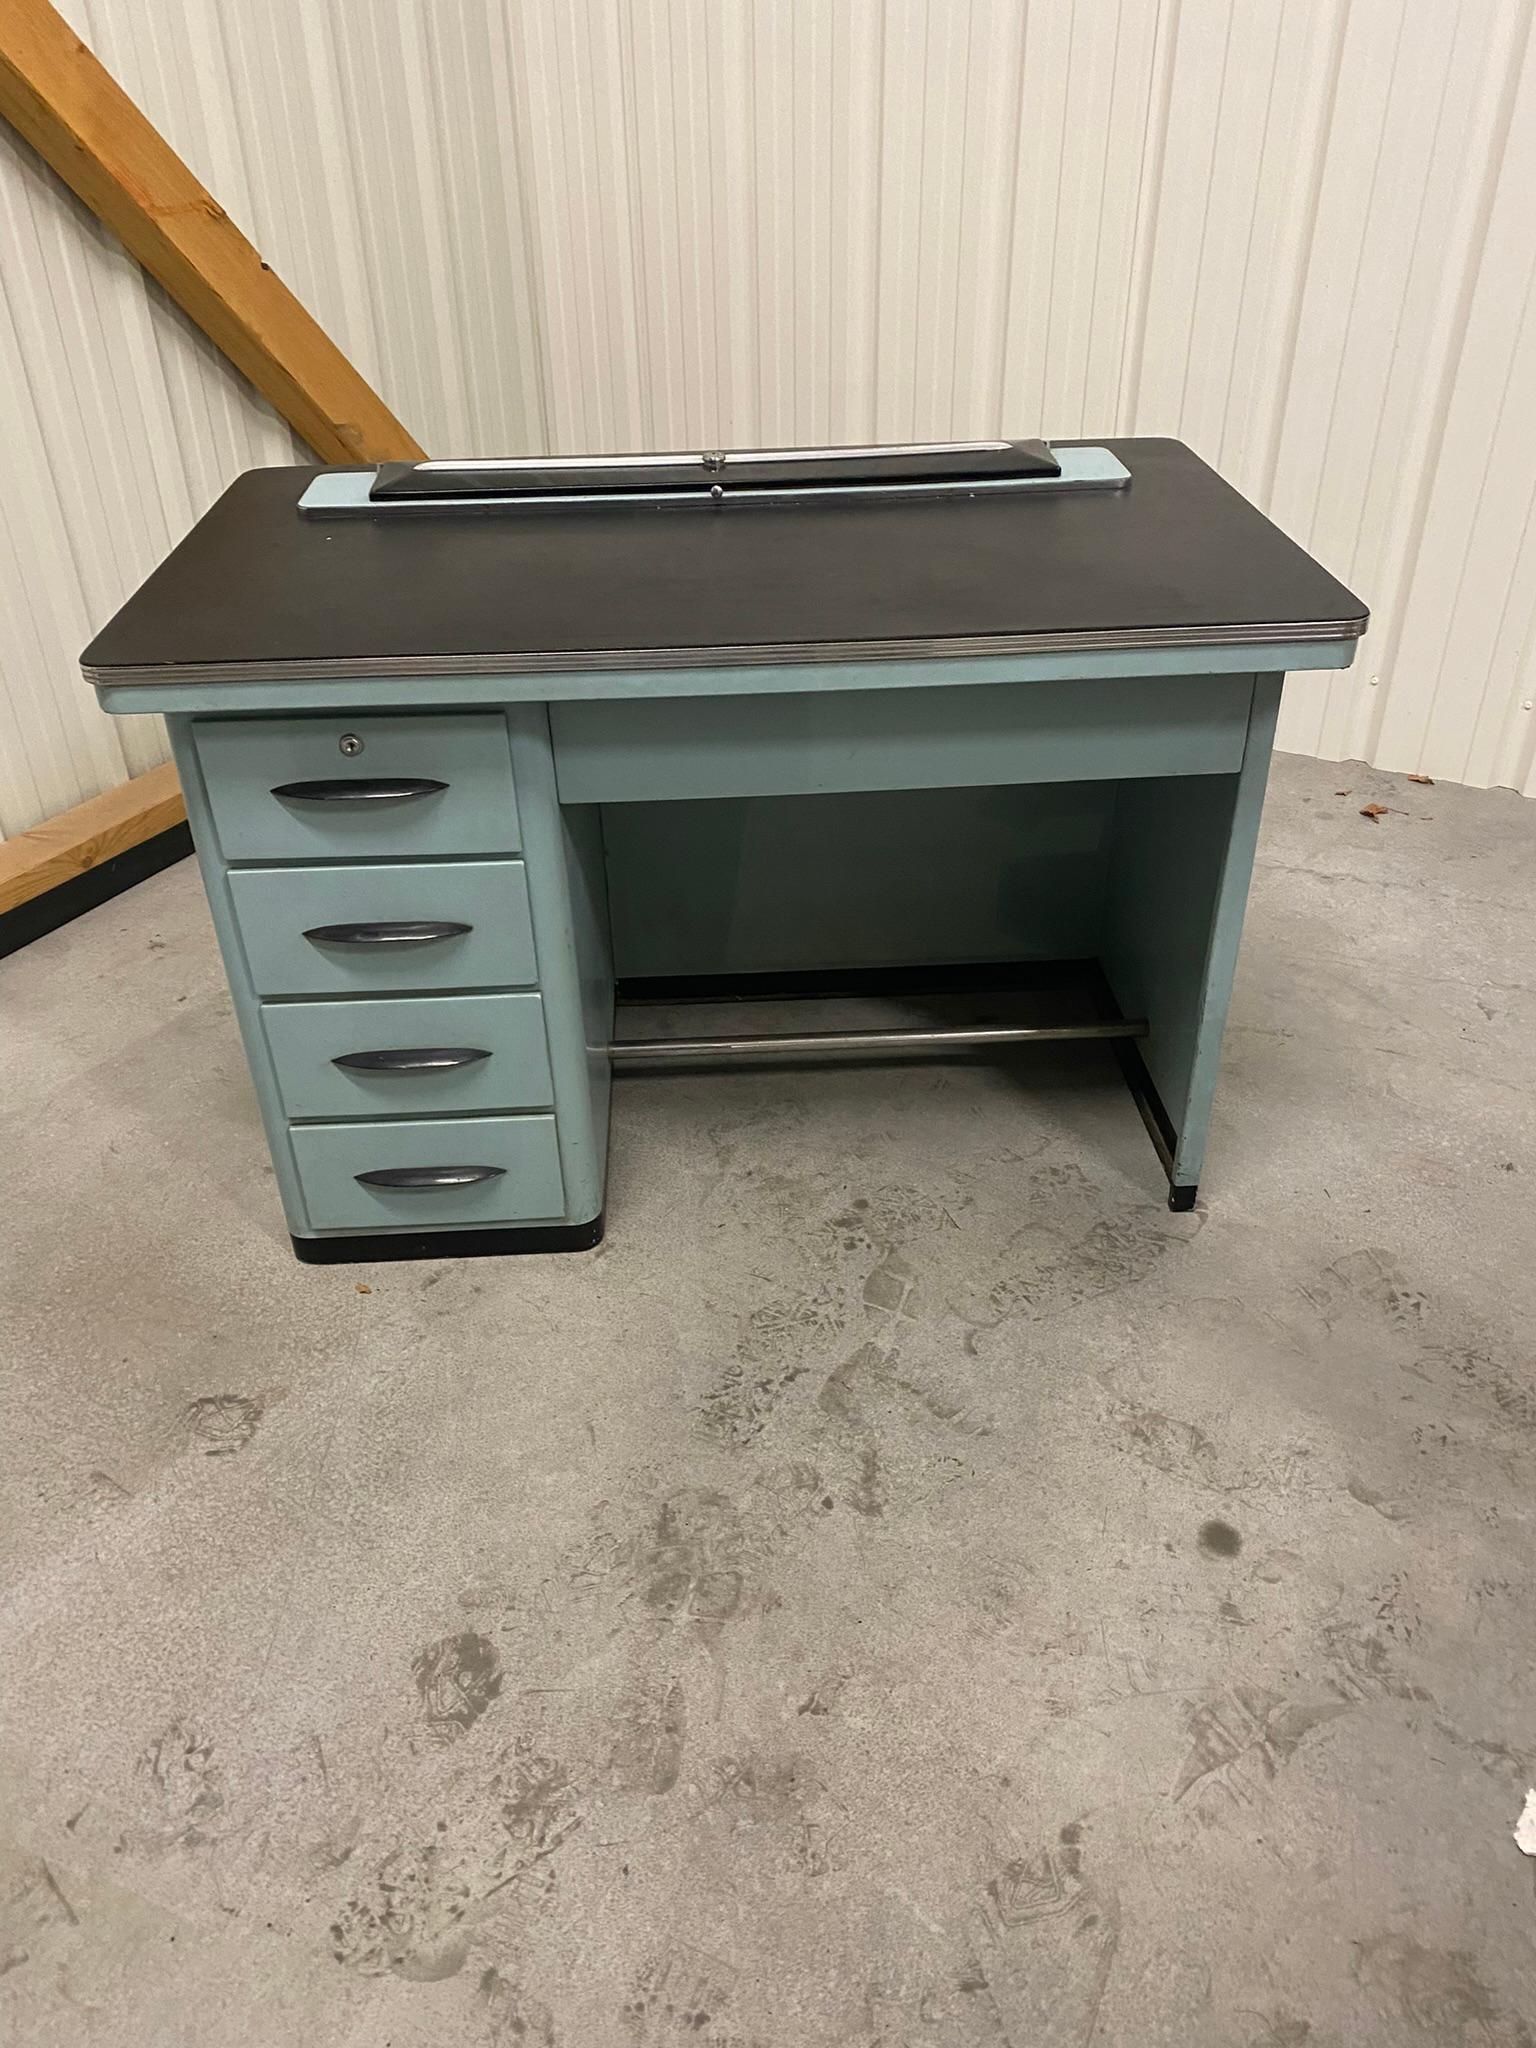 Metal desk, top covered with faux leather circa 1960
Maybe a former dentist's office.